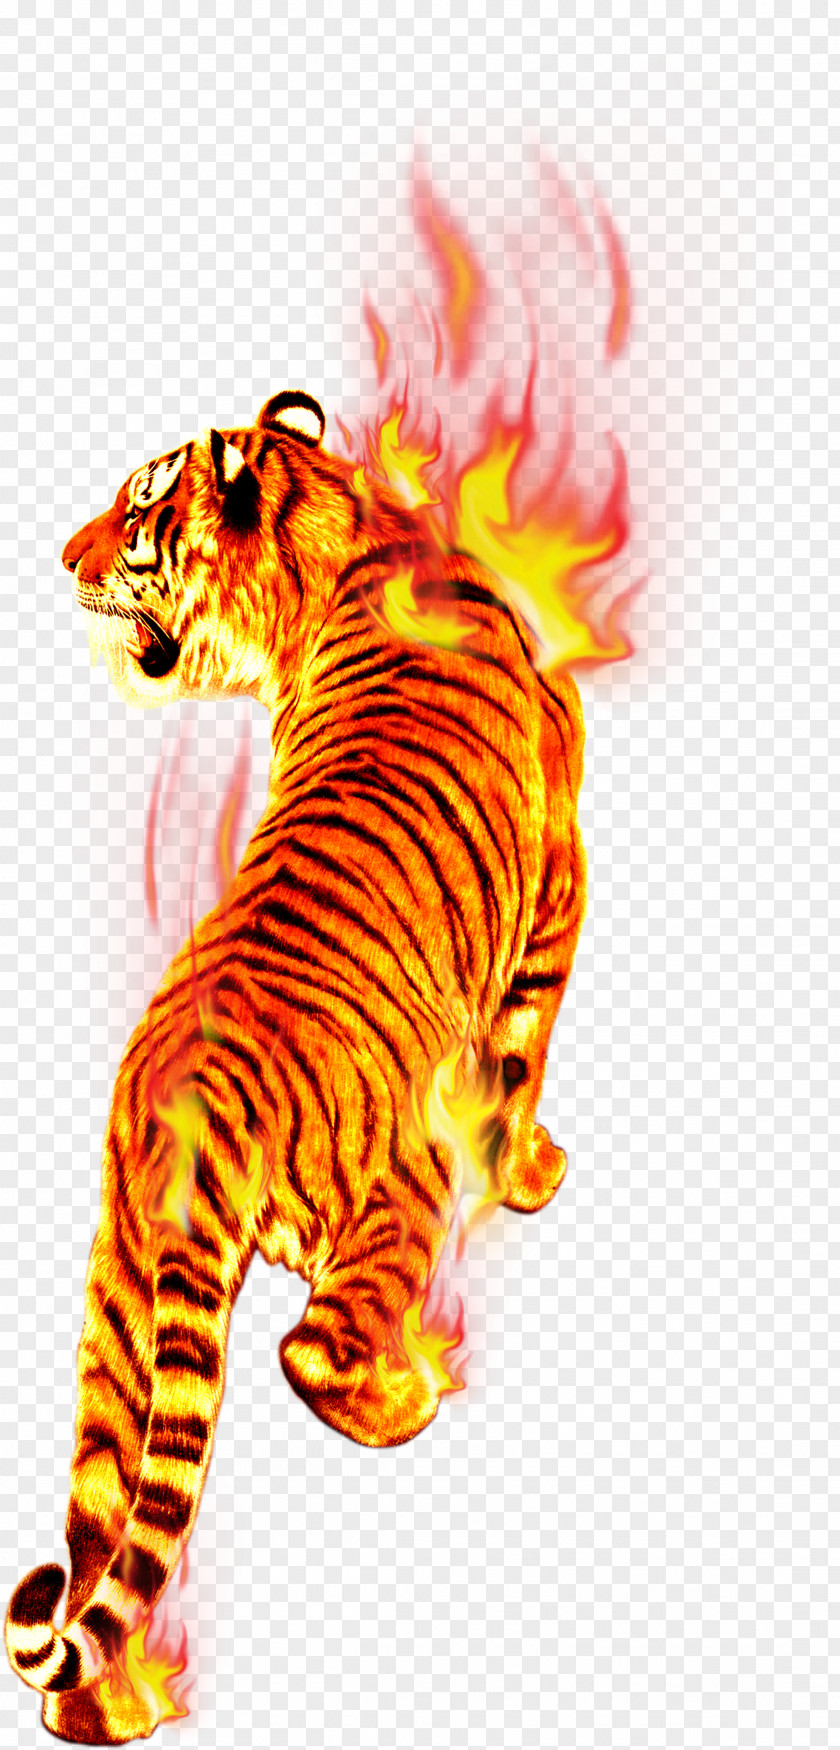 Tiger In Flames Flame Fire Combustion PNG